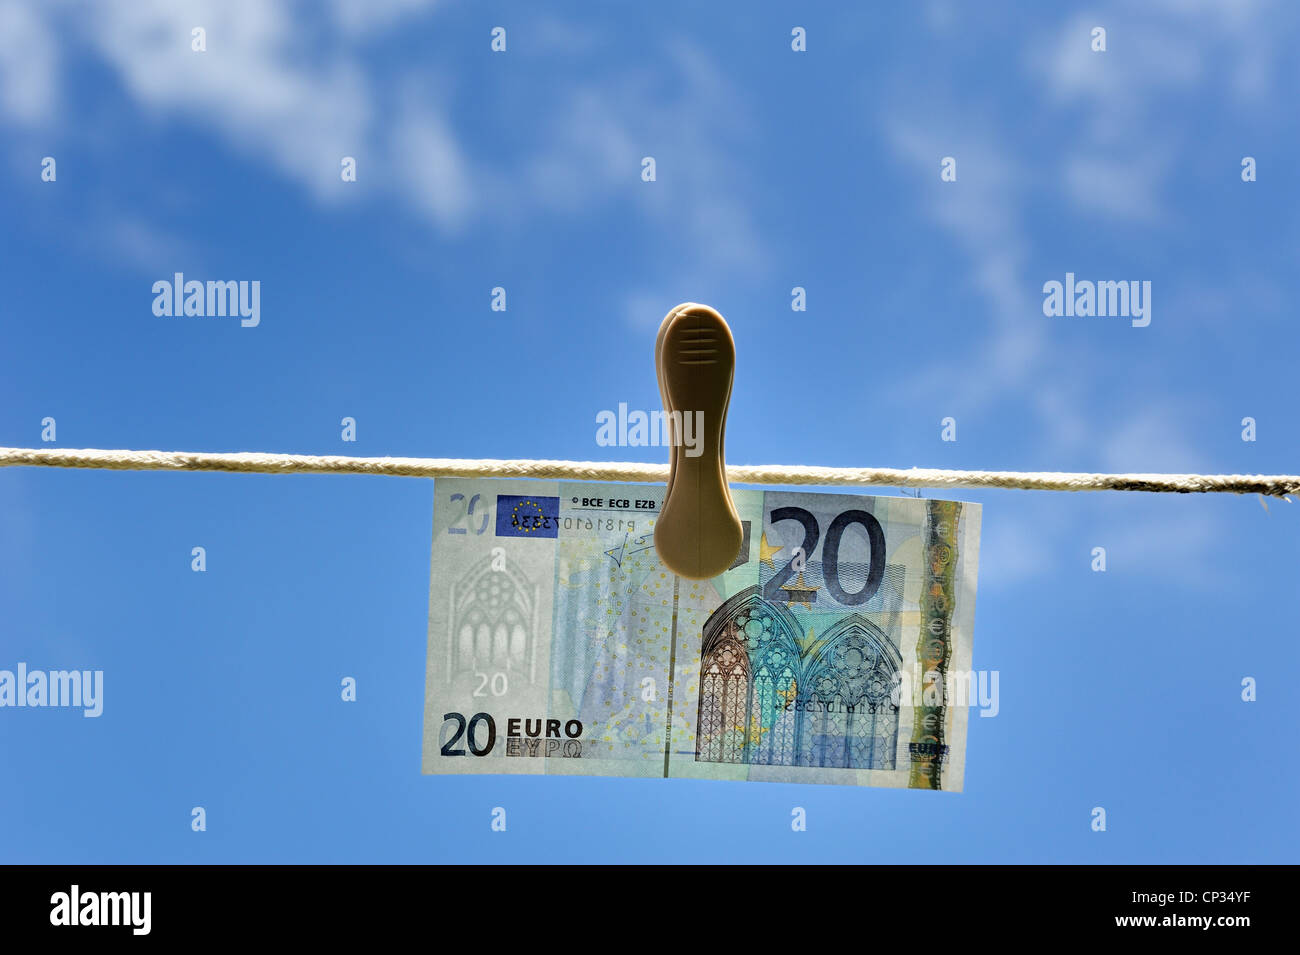 Euro note on a washing line with blue sky and clouds in the background england uk Stock Photo